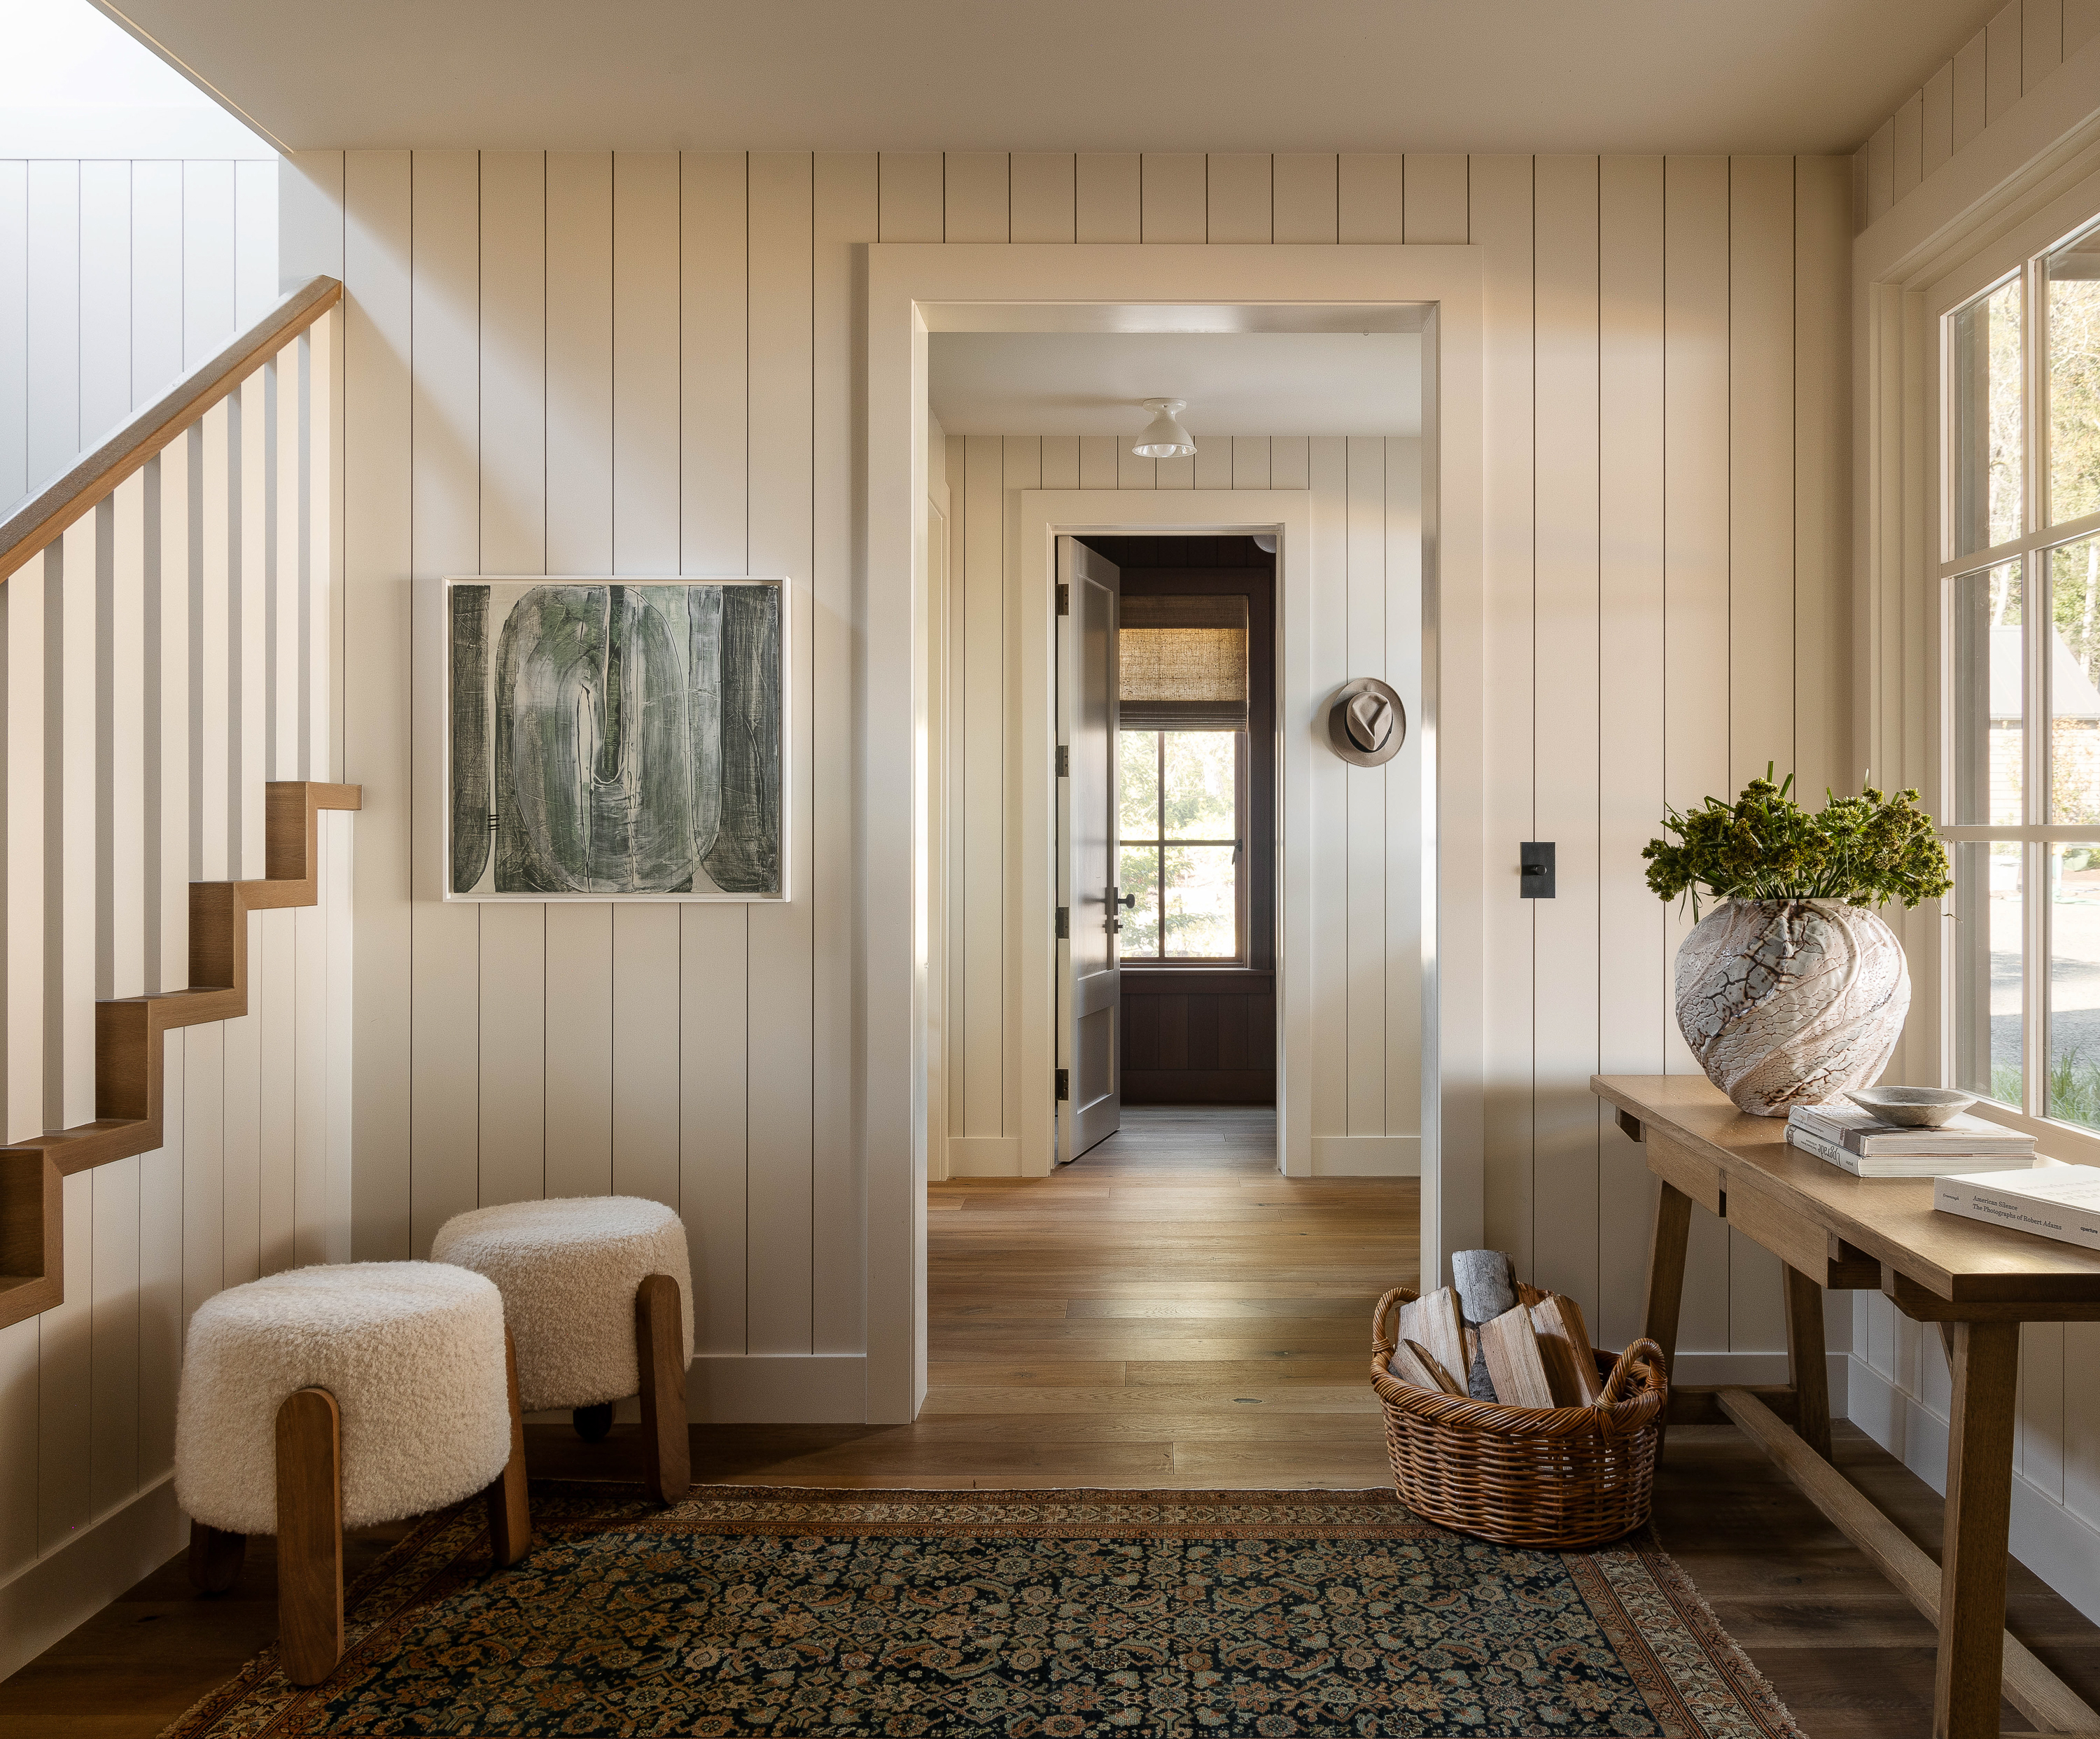 The entry foyer, bright and airy, becomes a central access point, with simple furnishings for a key drop and package storage. A dark Persian rug adds warmth and complements the family dog